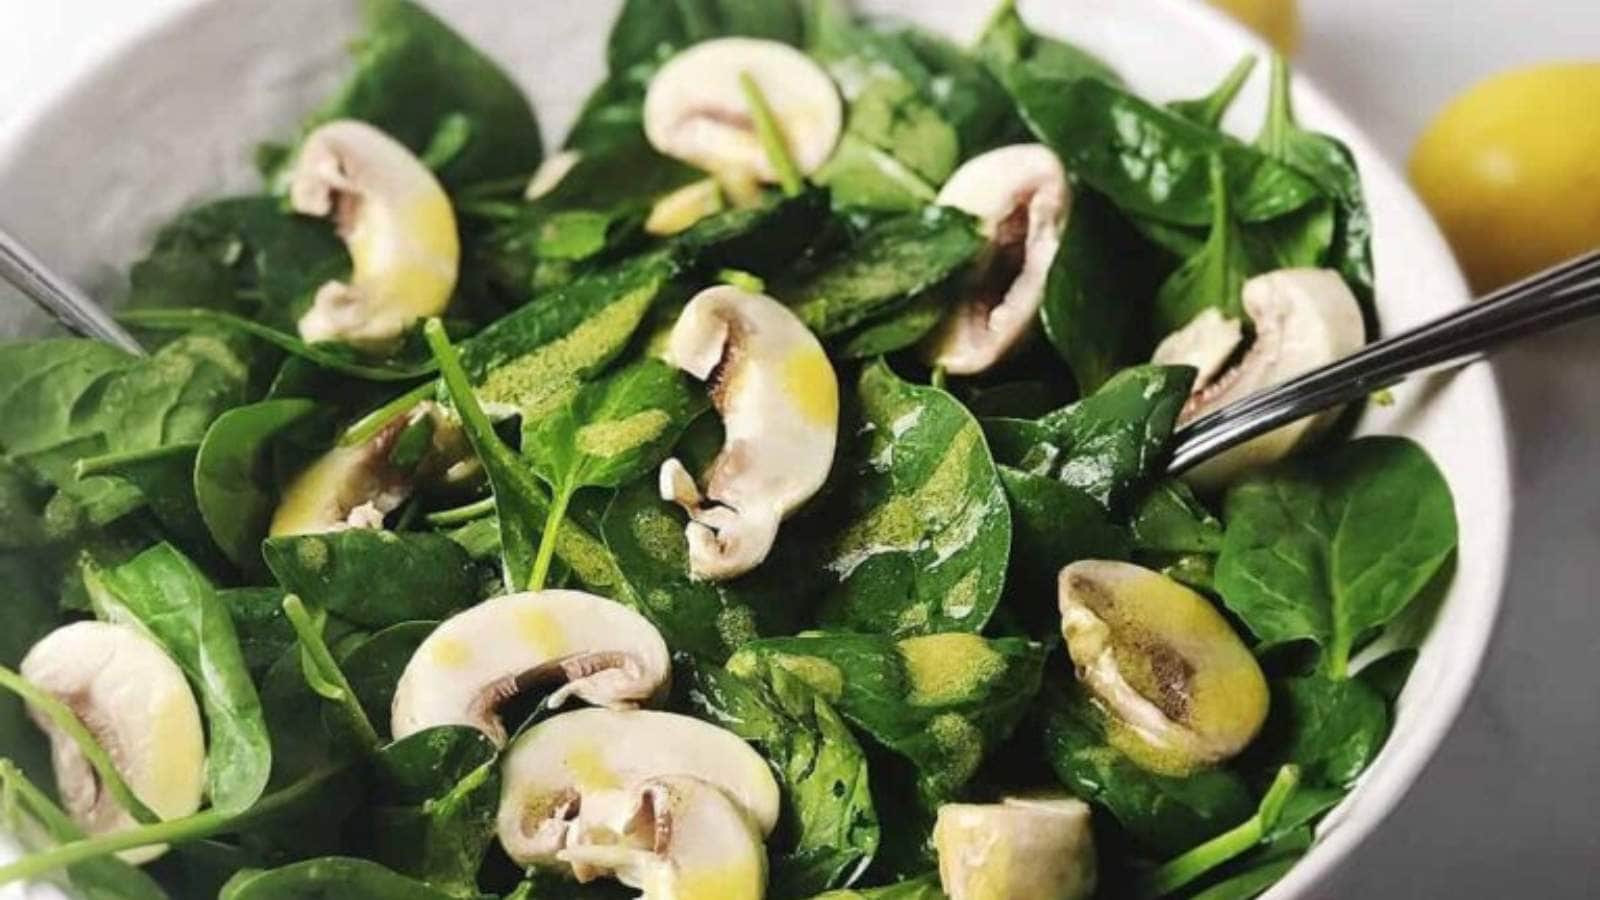 Spinach And Mashroom Salad recipe by Keeping It Simple.